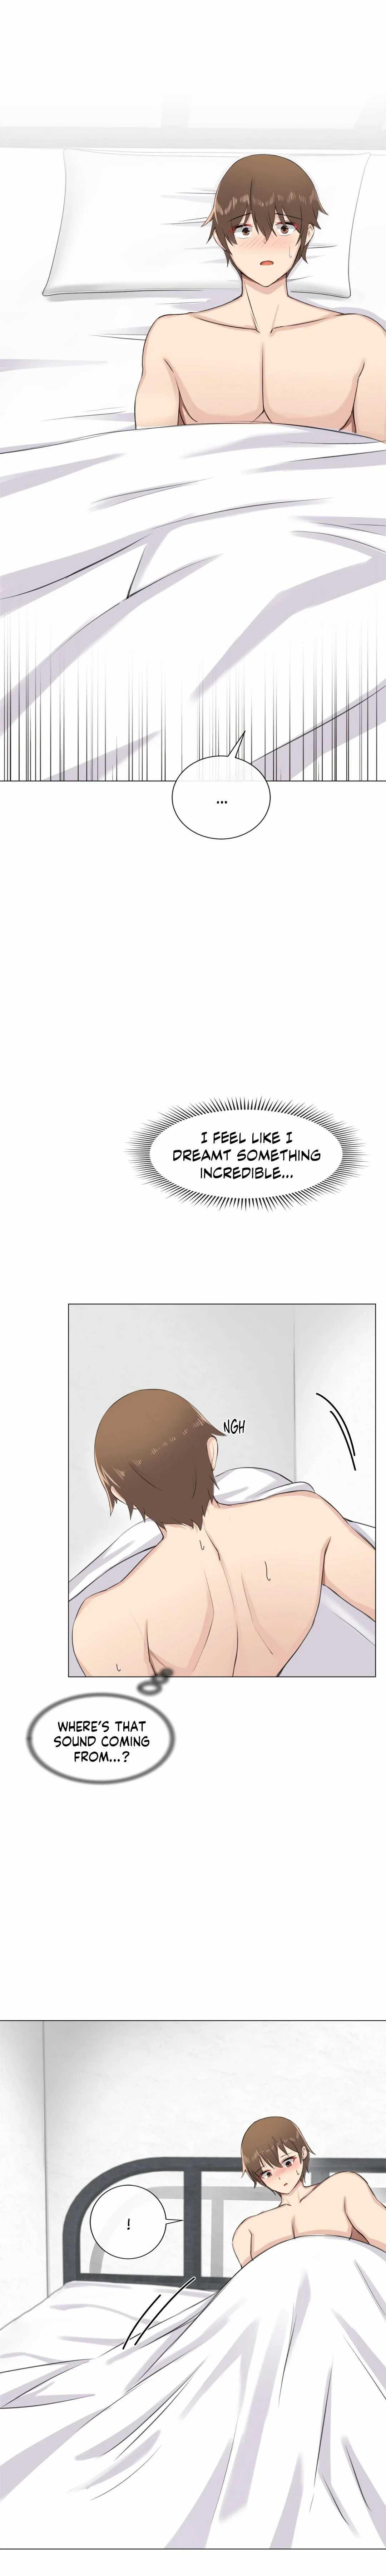 [Dumangoon, 130F] Sexcape Room: Pile Up Ch.9/9 [English] [Manhwa PDF] Completed 131